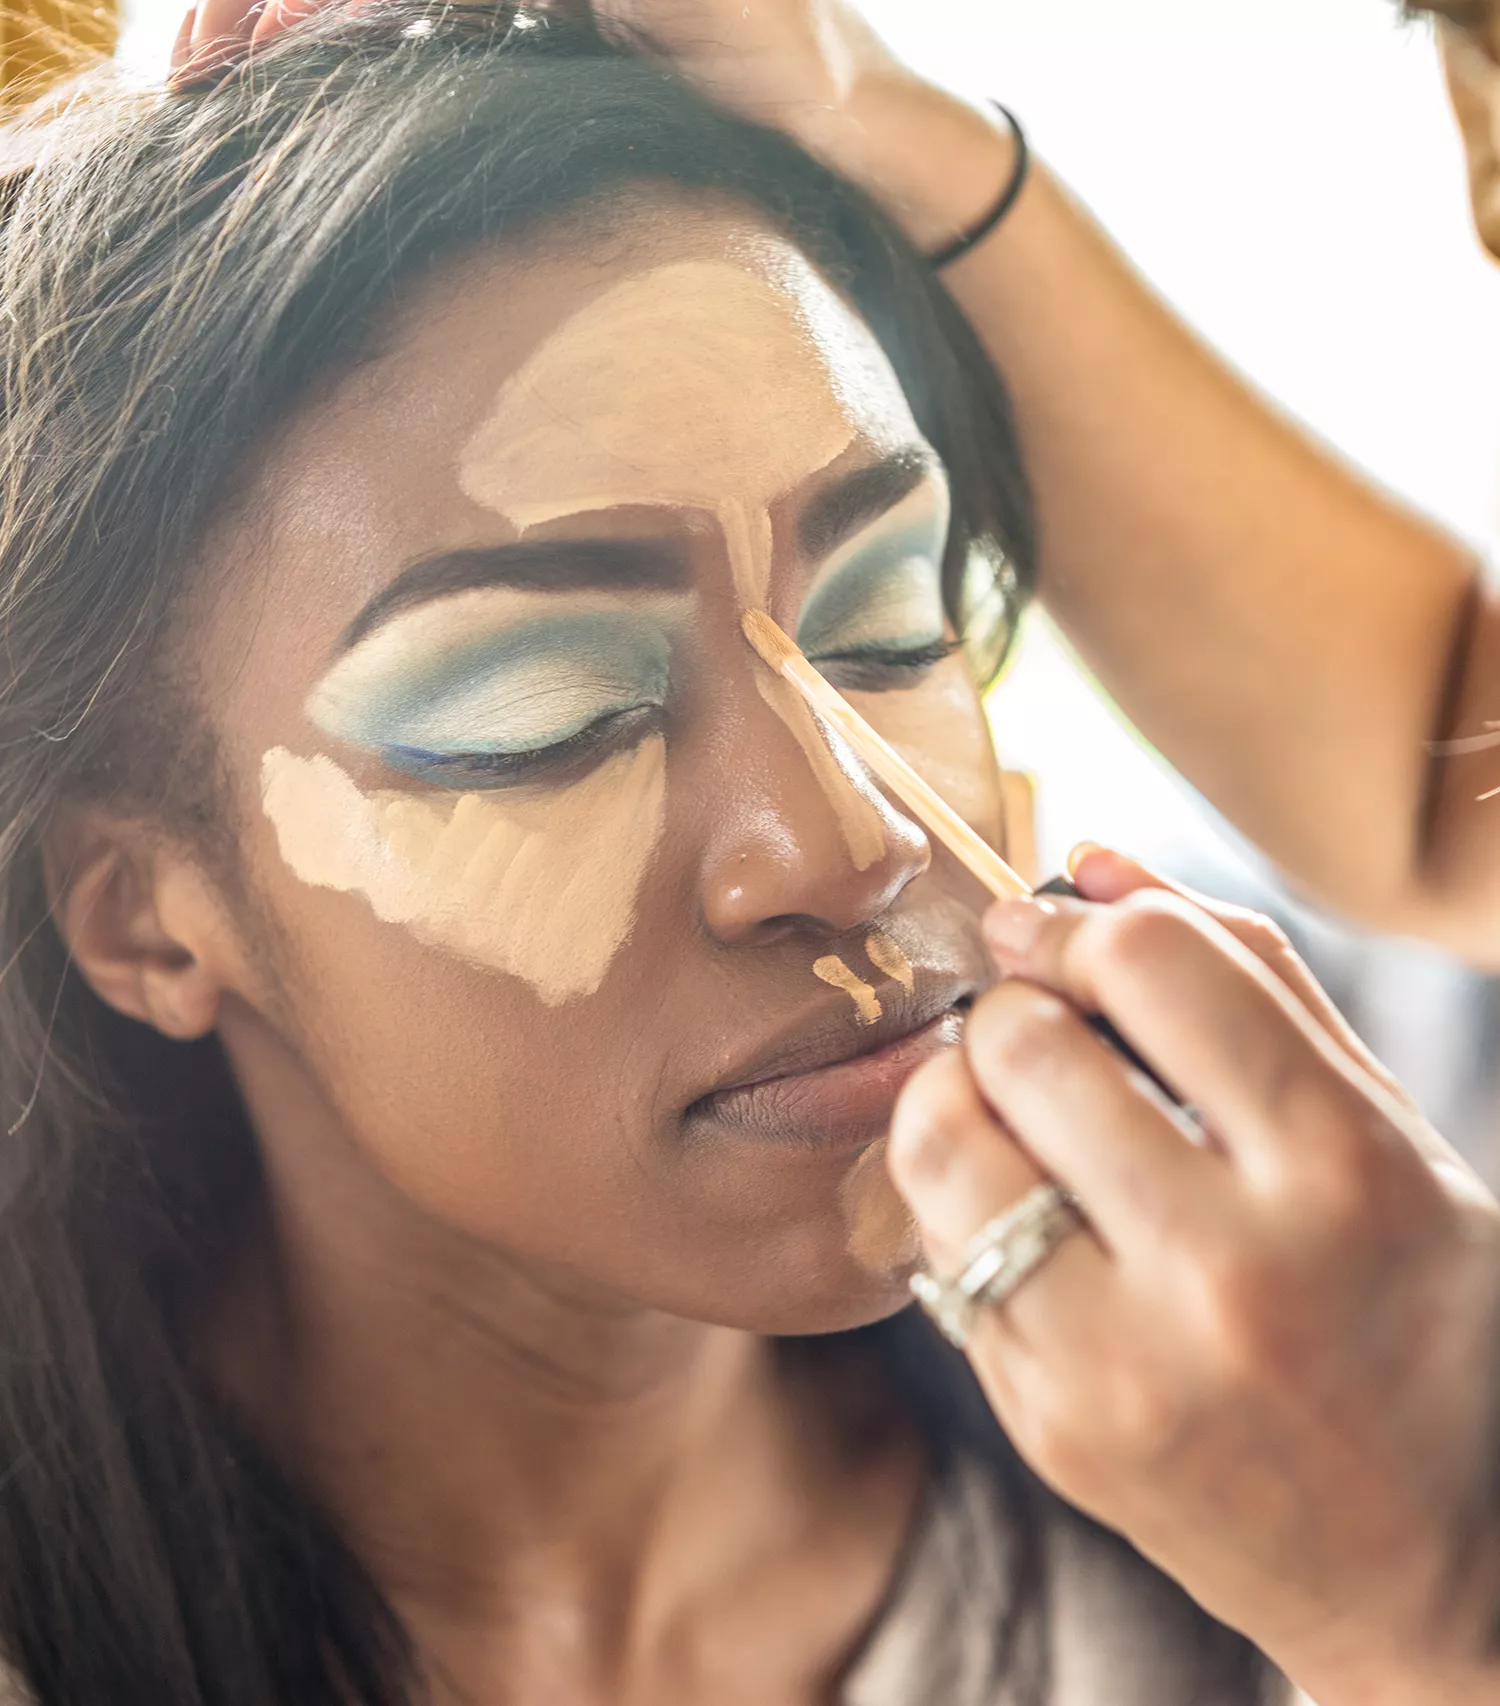 Makeup artist contouring with concealer